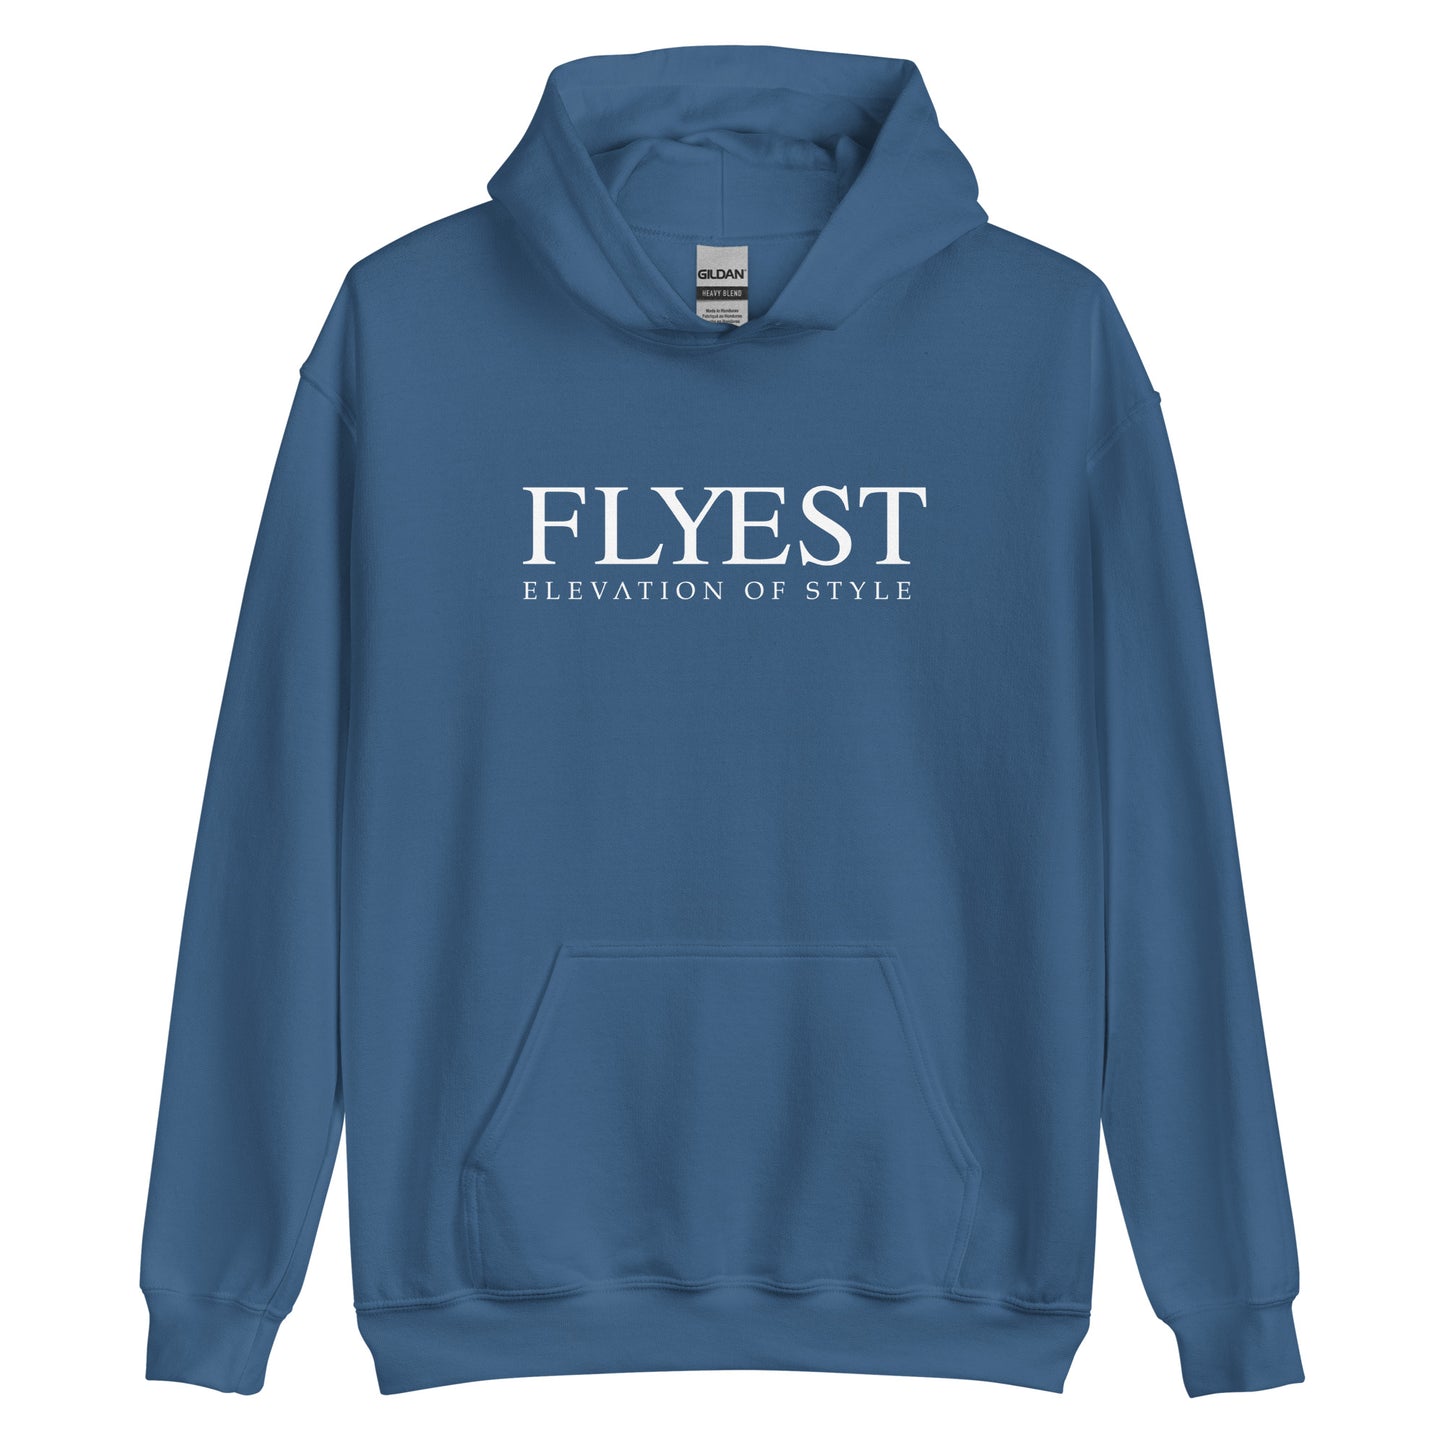 Flyest Elevation of Style Women's Hoodie